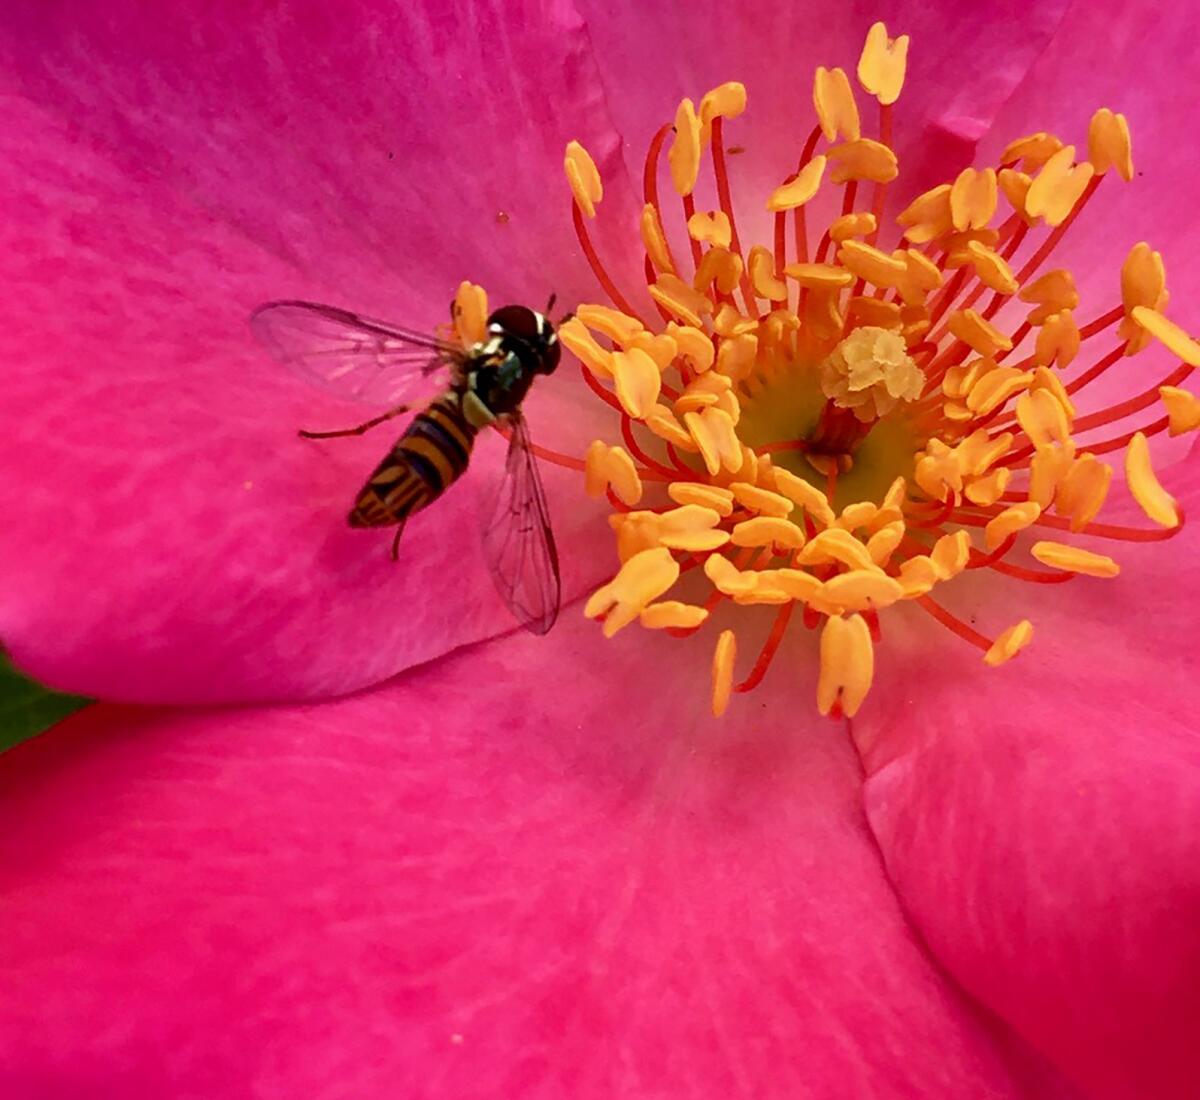 The syrphid fly is among the garden’s helpers. Don’t harm them!